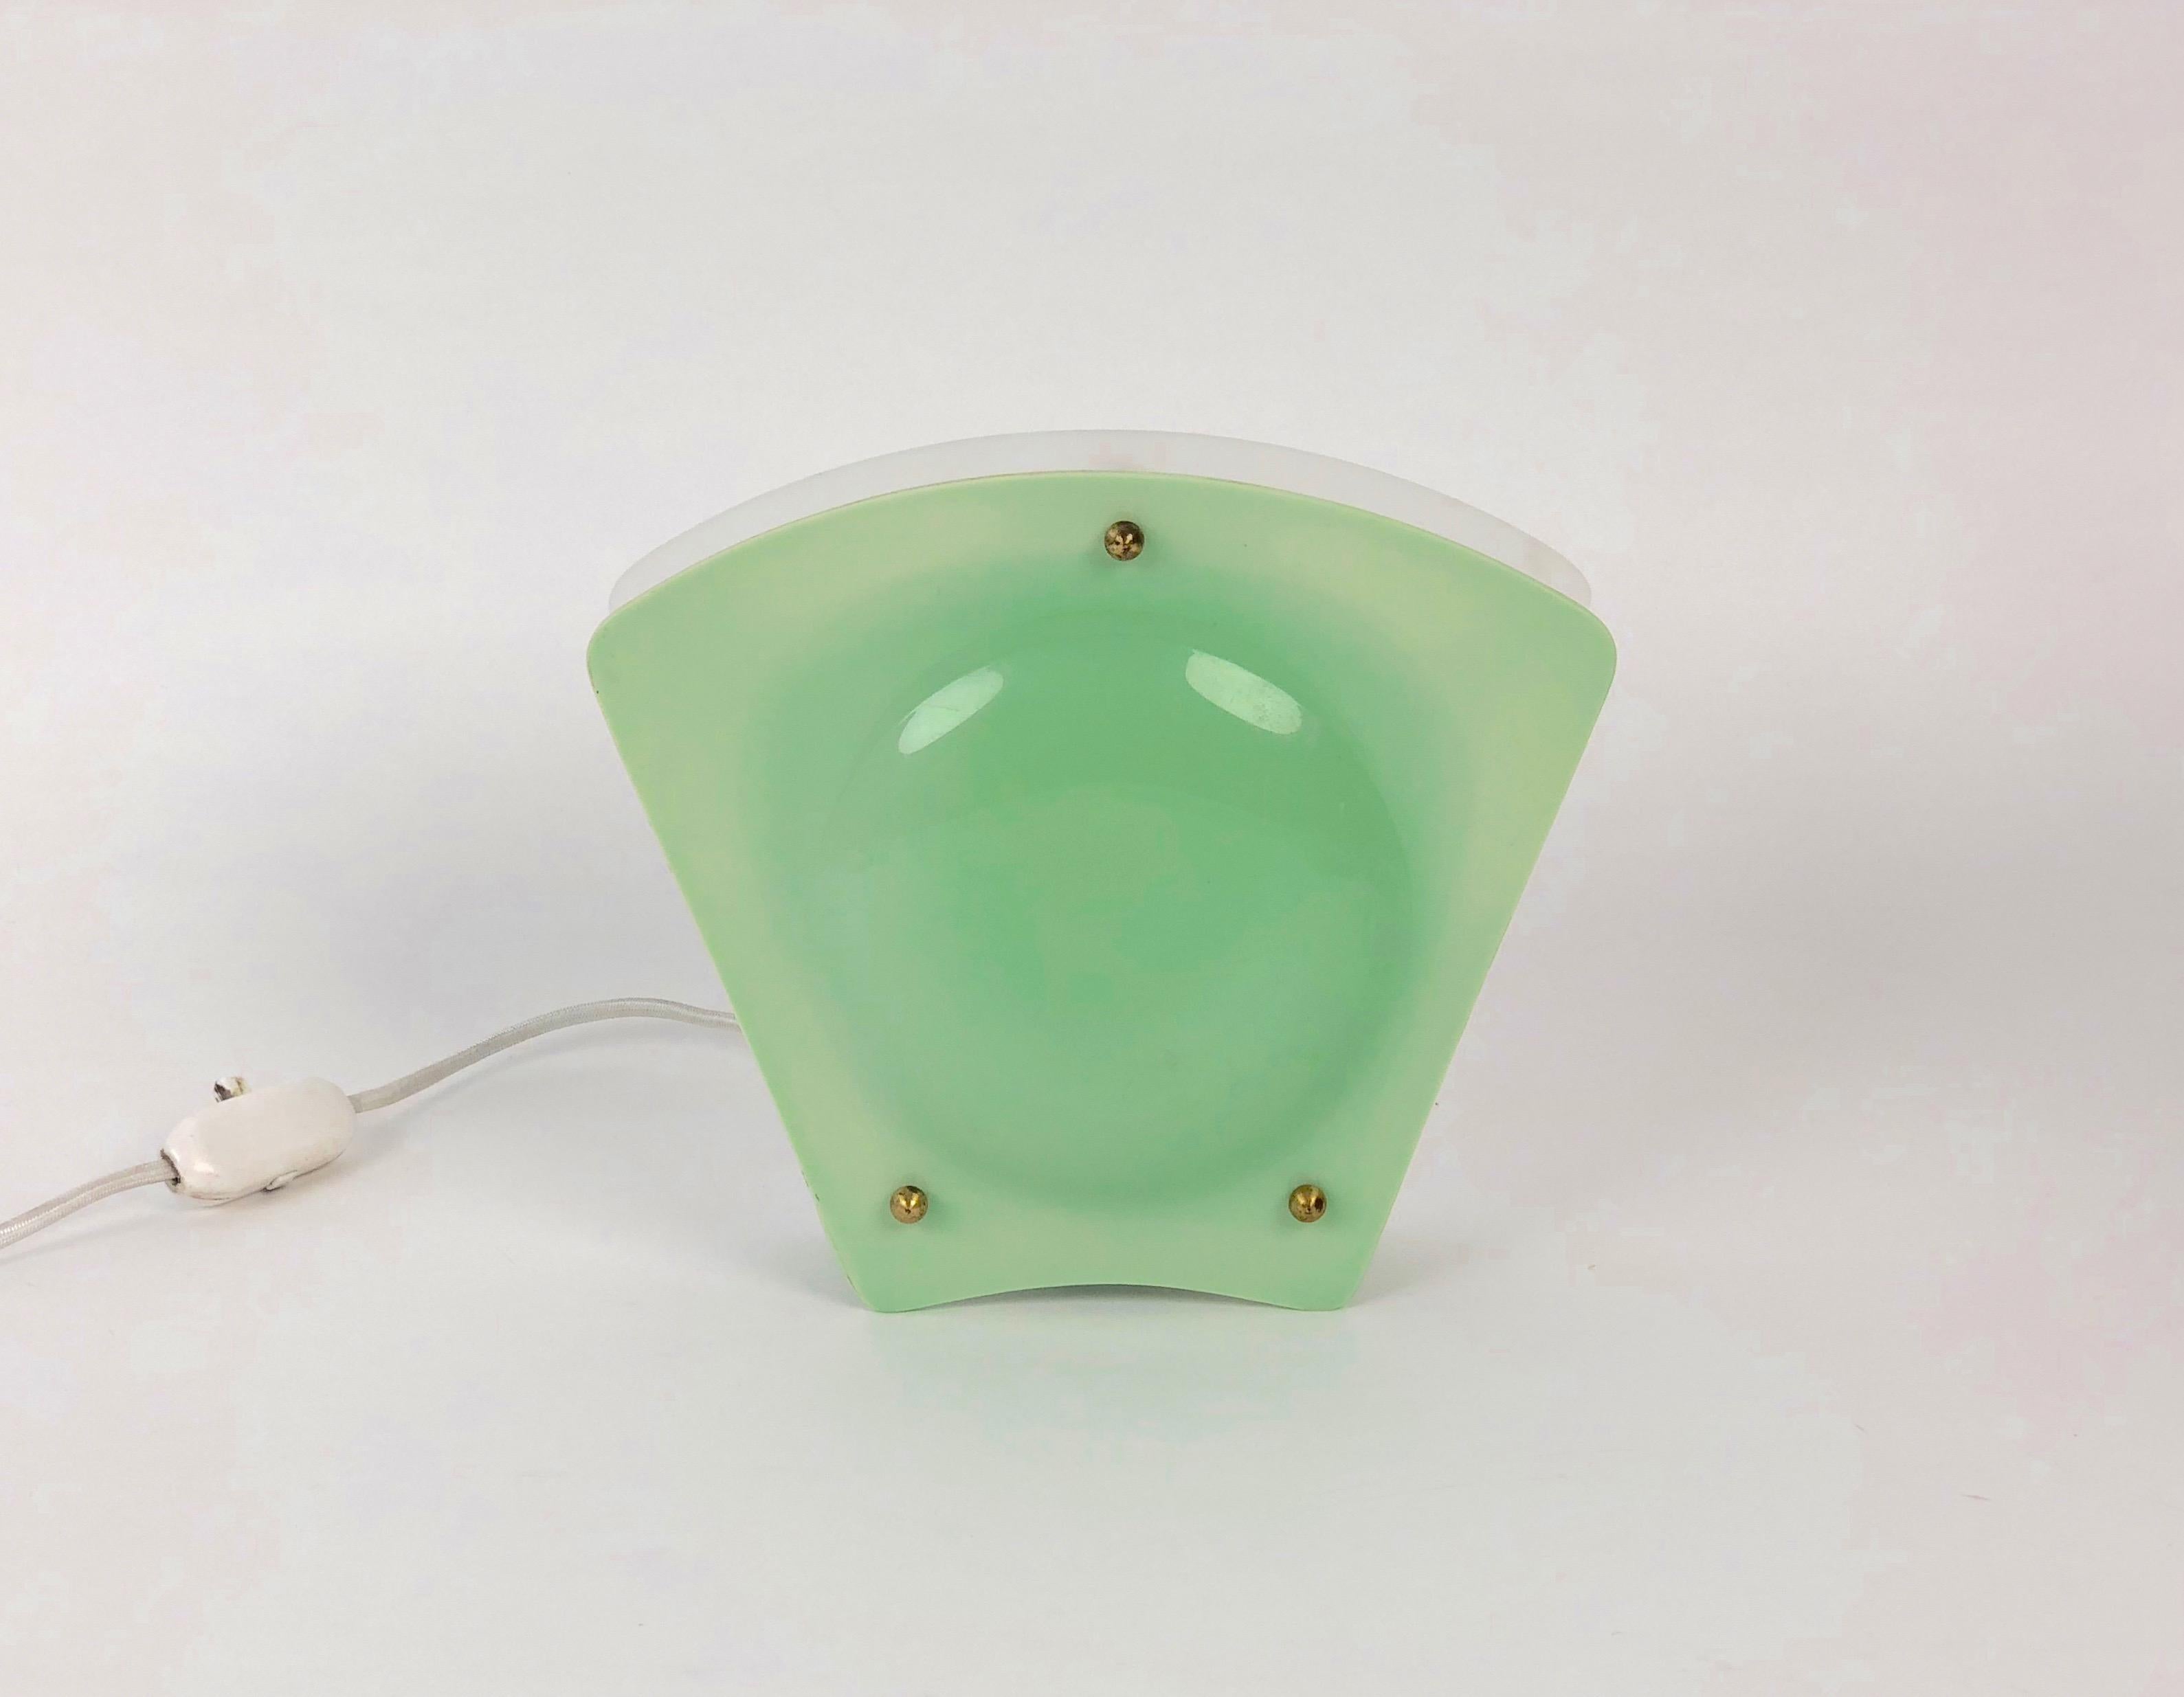 A simple, charming night light from Austria out of the 1950's. The white plastic side is meant to reflect light on the wall and green side is for viewing. The lamp uses a 10 to 15 watt bulb typically found in refrigerators. Matt bulbs give the best